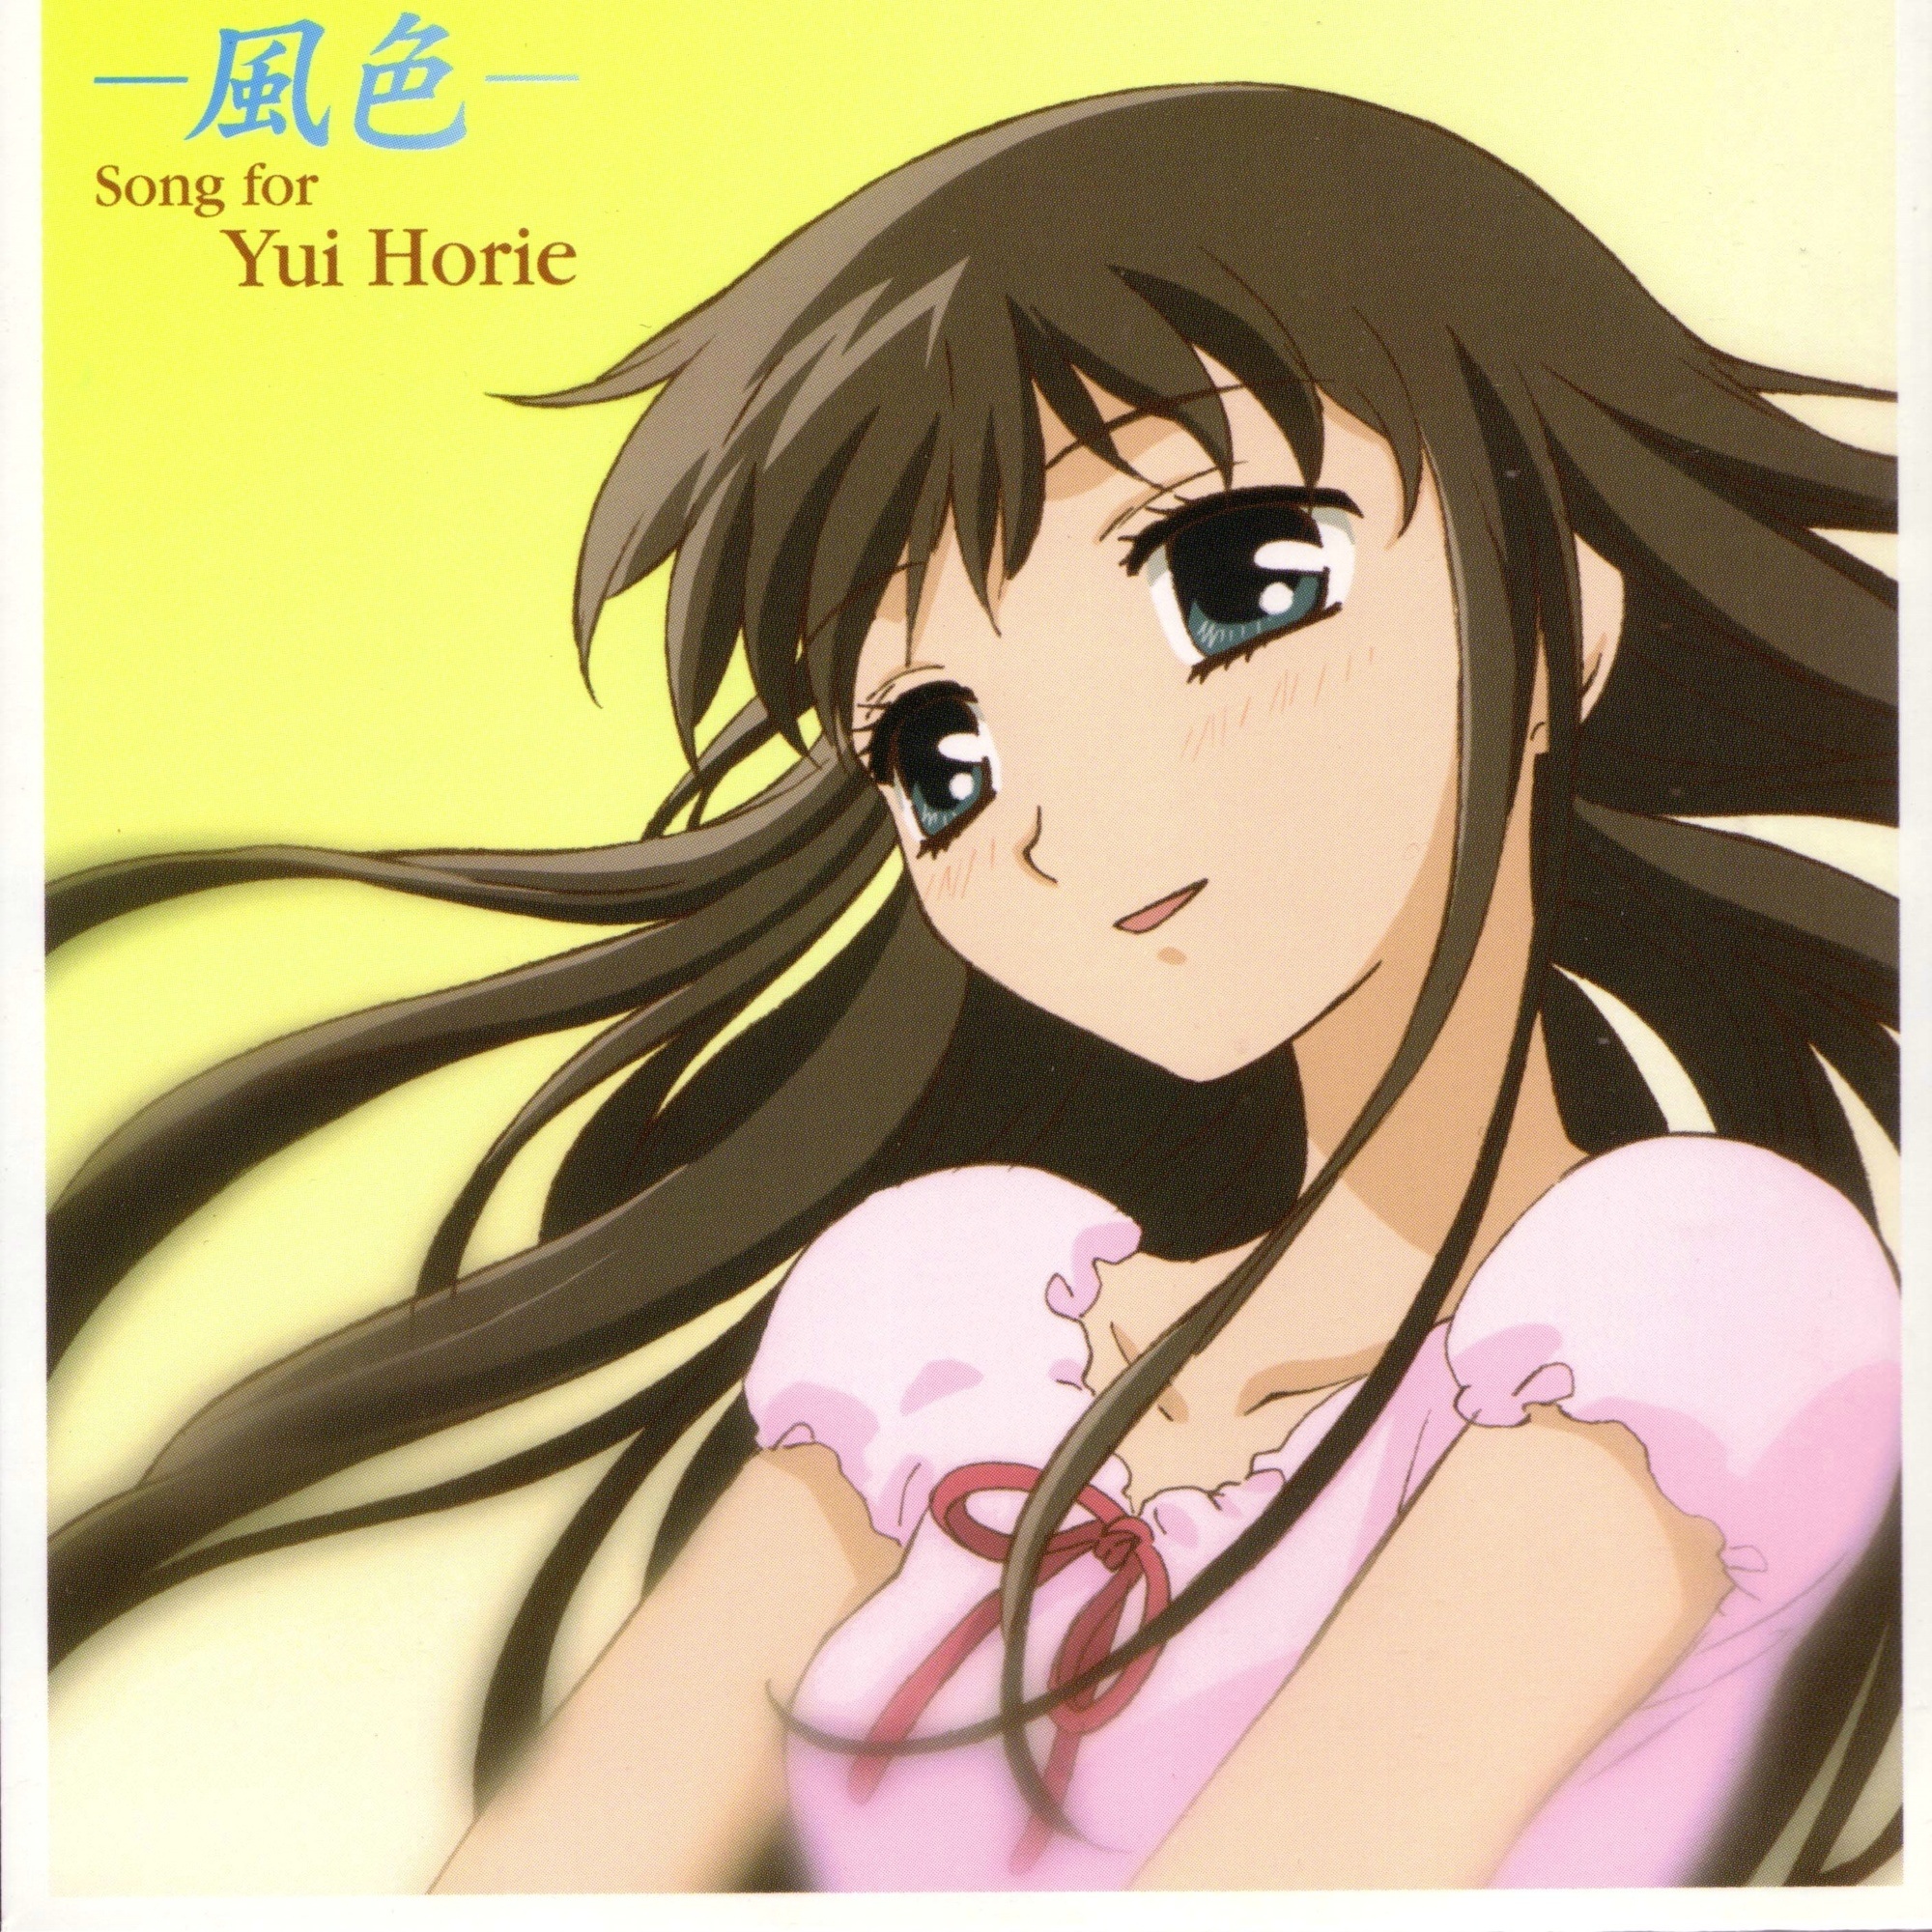 feng se Song for Yui Horie